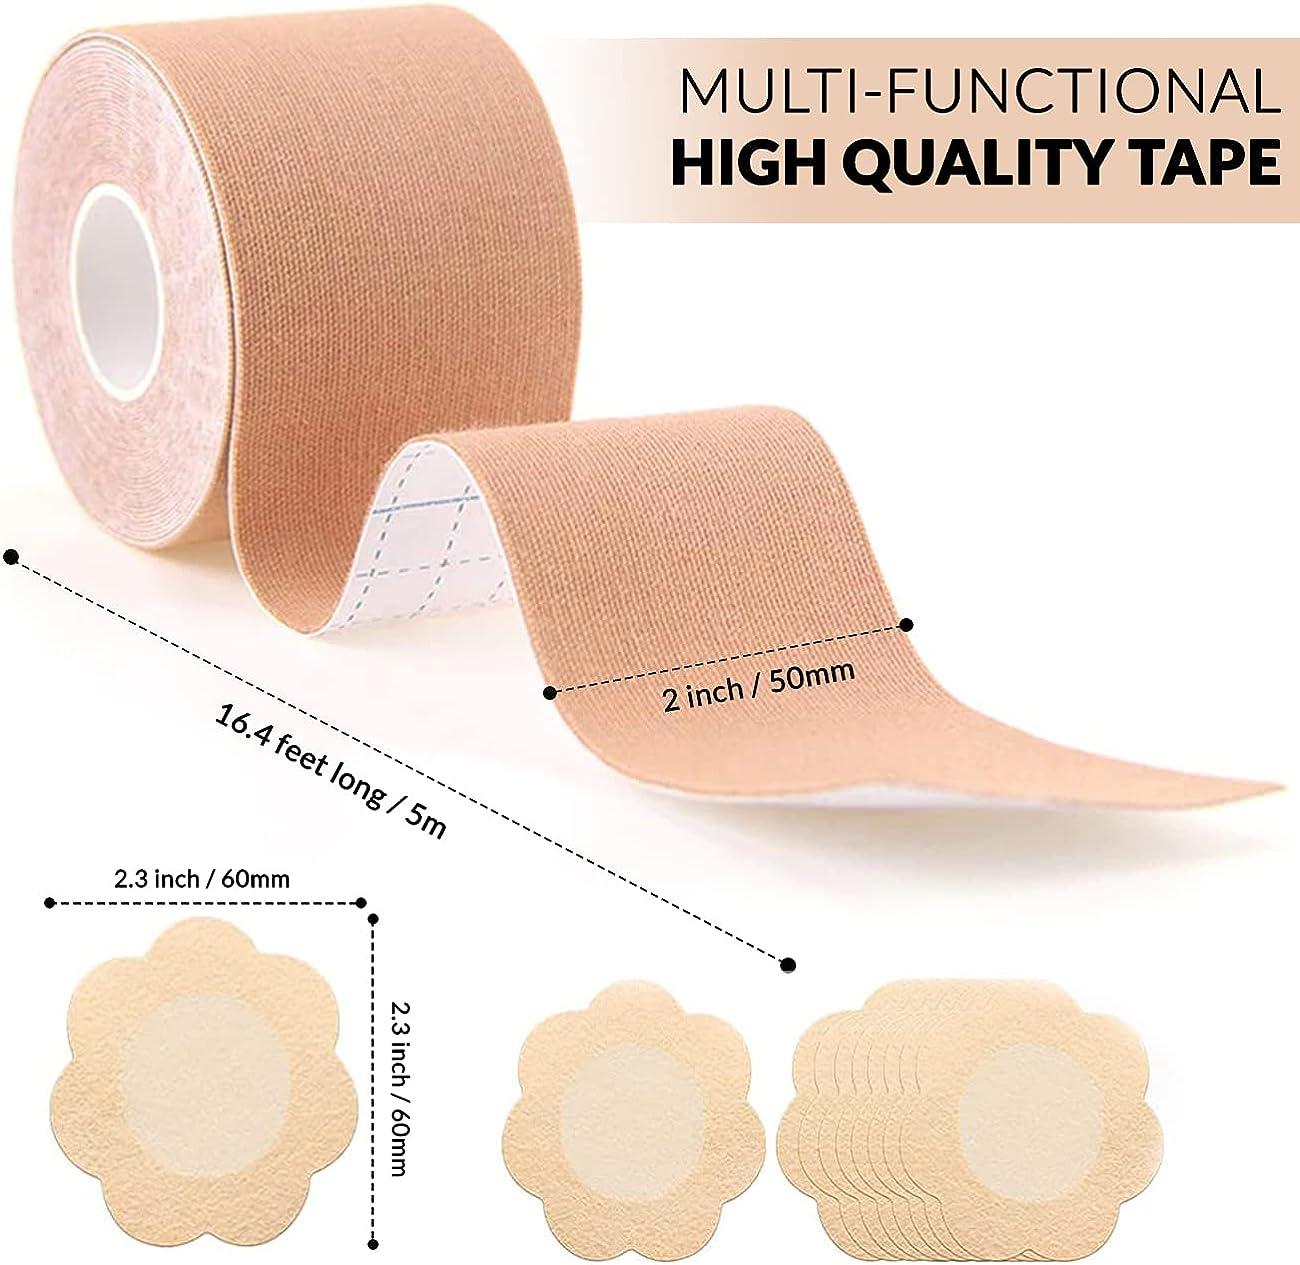 Sanfe] Body Shape Tape Combo-Breast Shaper & Lifter, Breathable Breast  Support Boobtape, 5-meter MVR 290 Sanfe Body Shape Tape (Breast